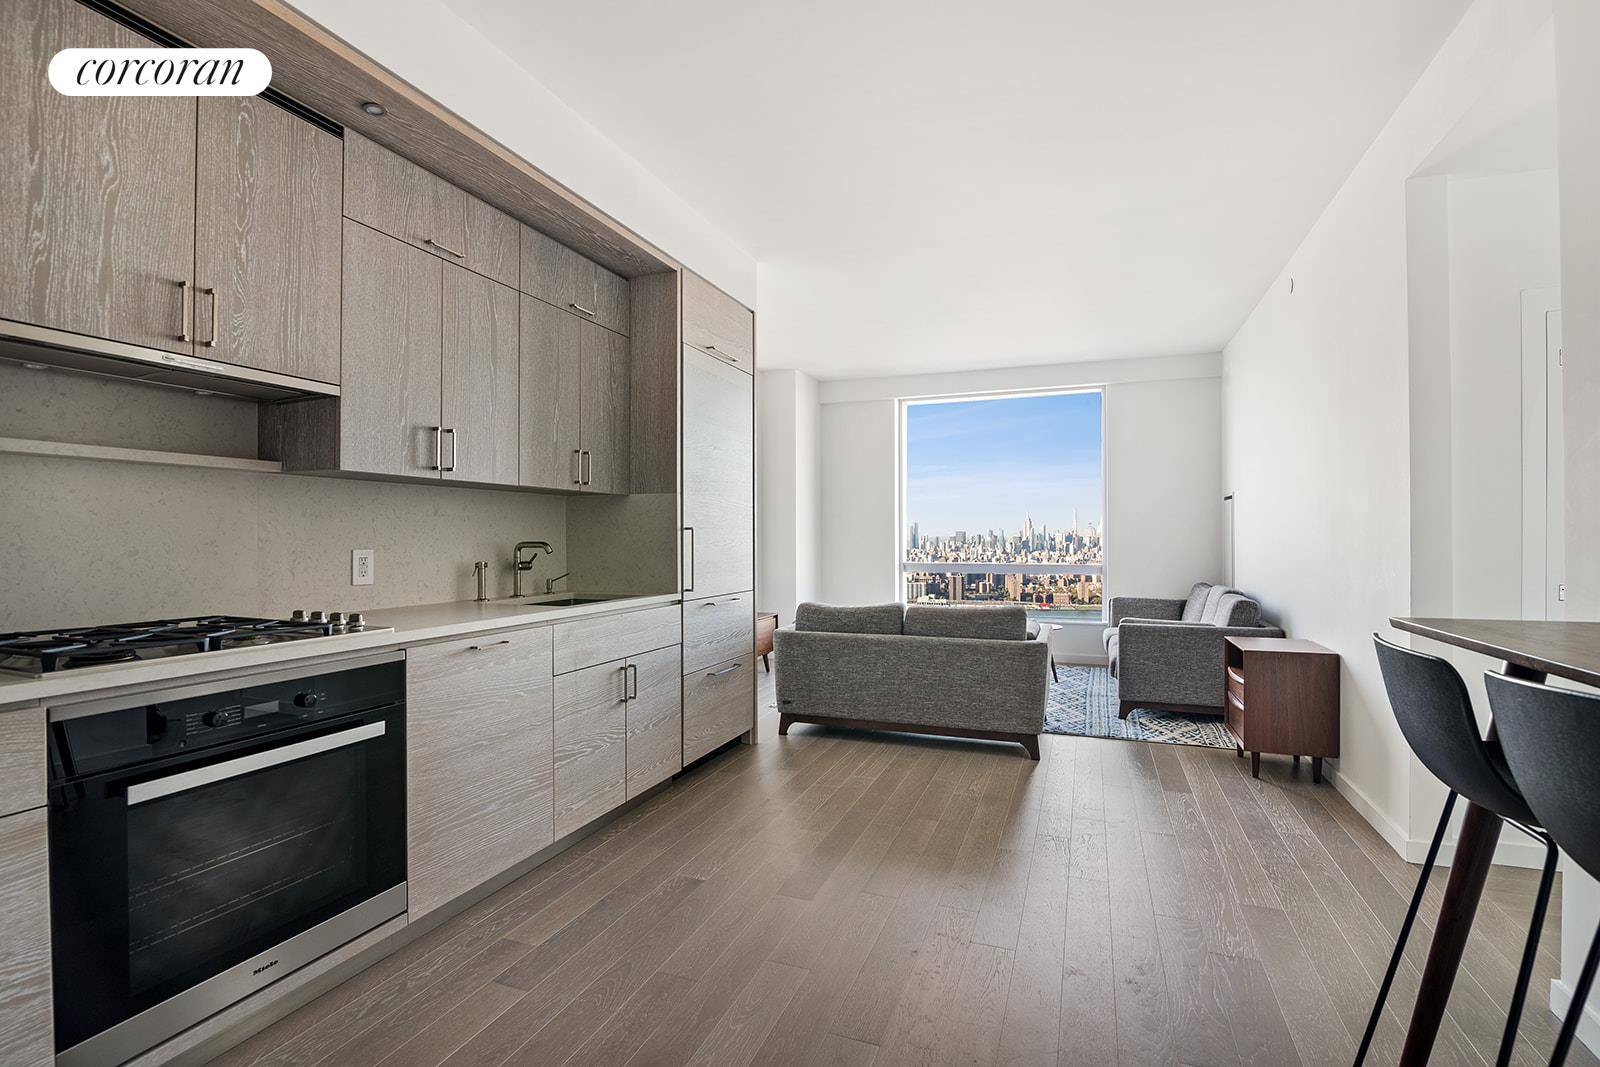 Experience this eclectically stylish two bedroom apartment with 40, 000 square feet of amenities and unmatched Manhattan views from 60s floor of the building.